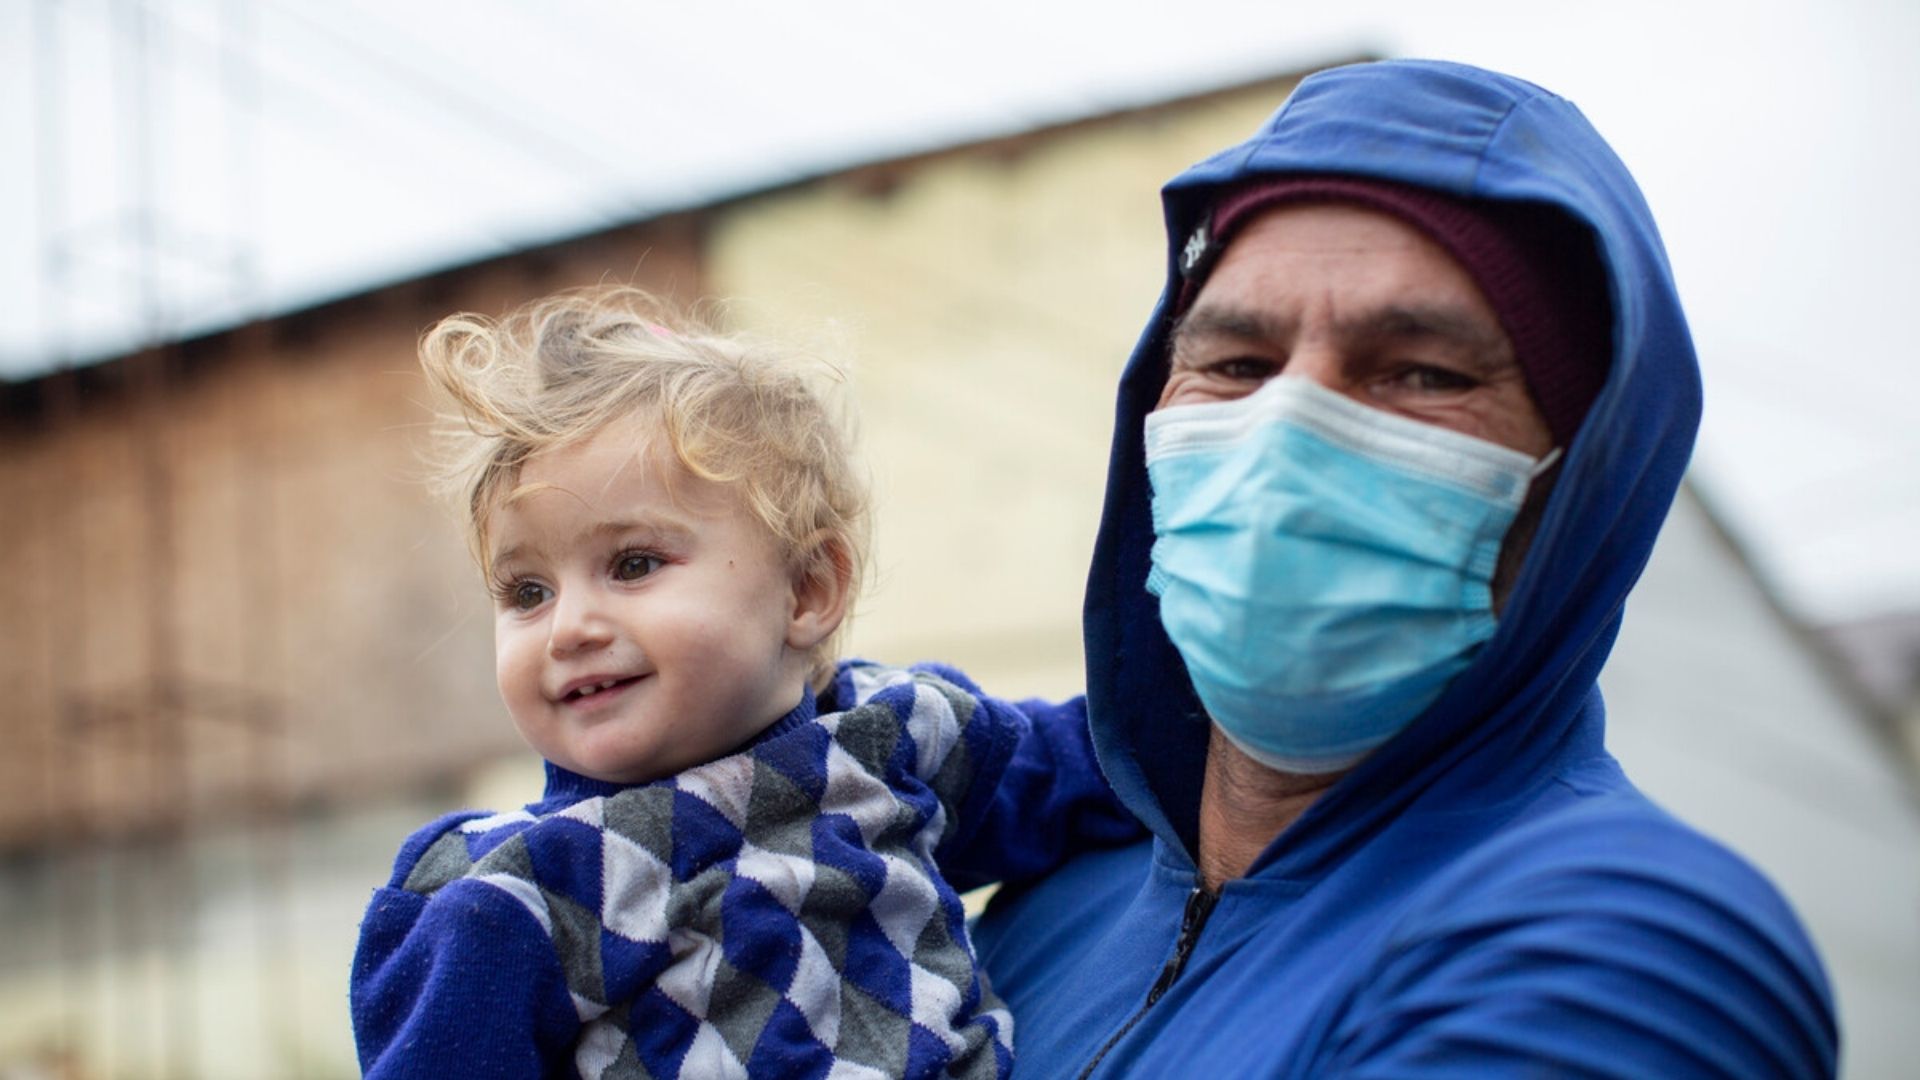 The father holds his youngest daughter outside with mask on